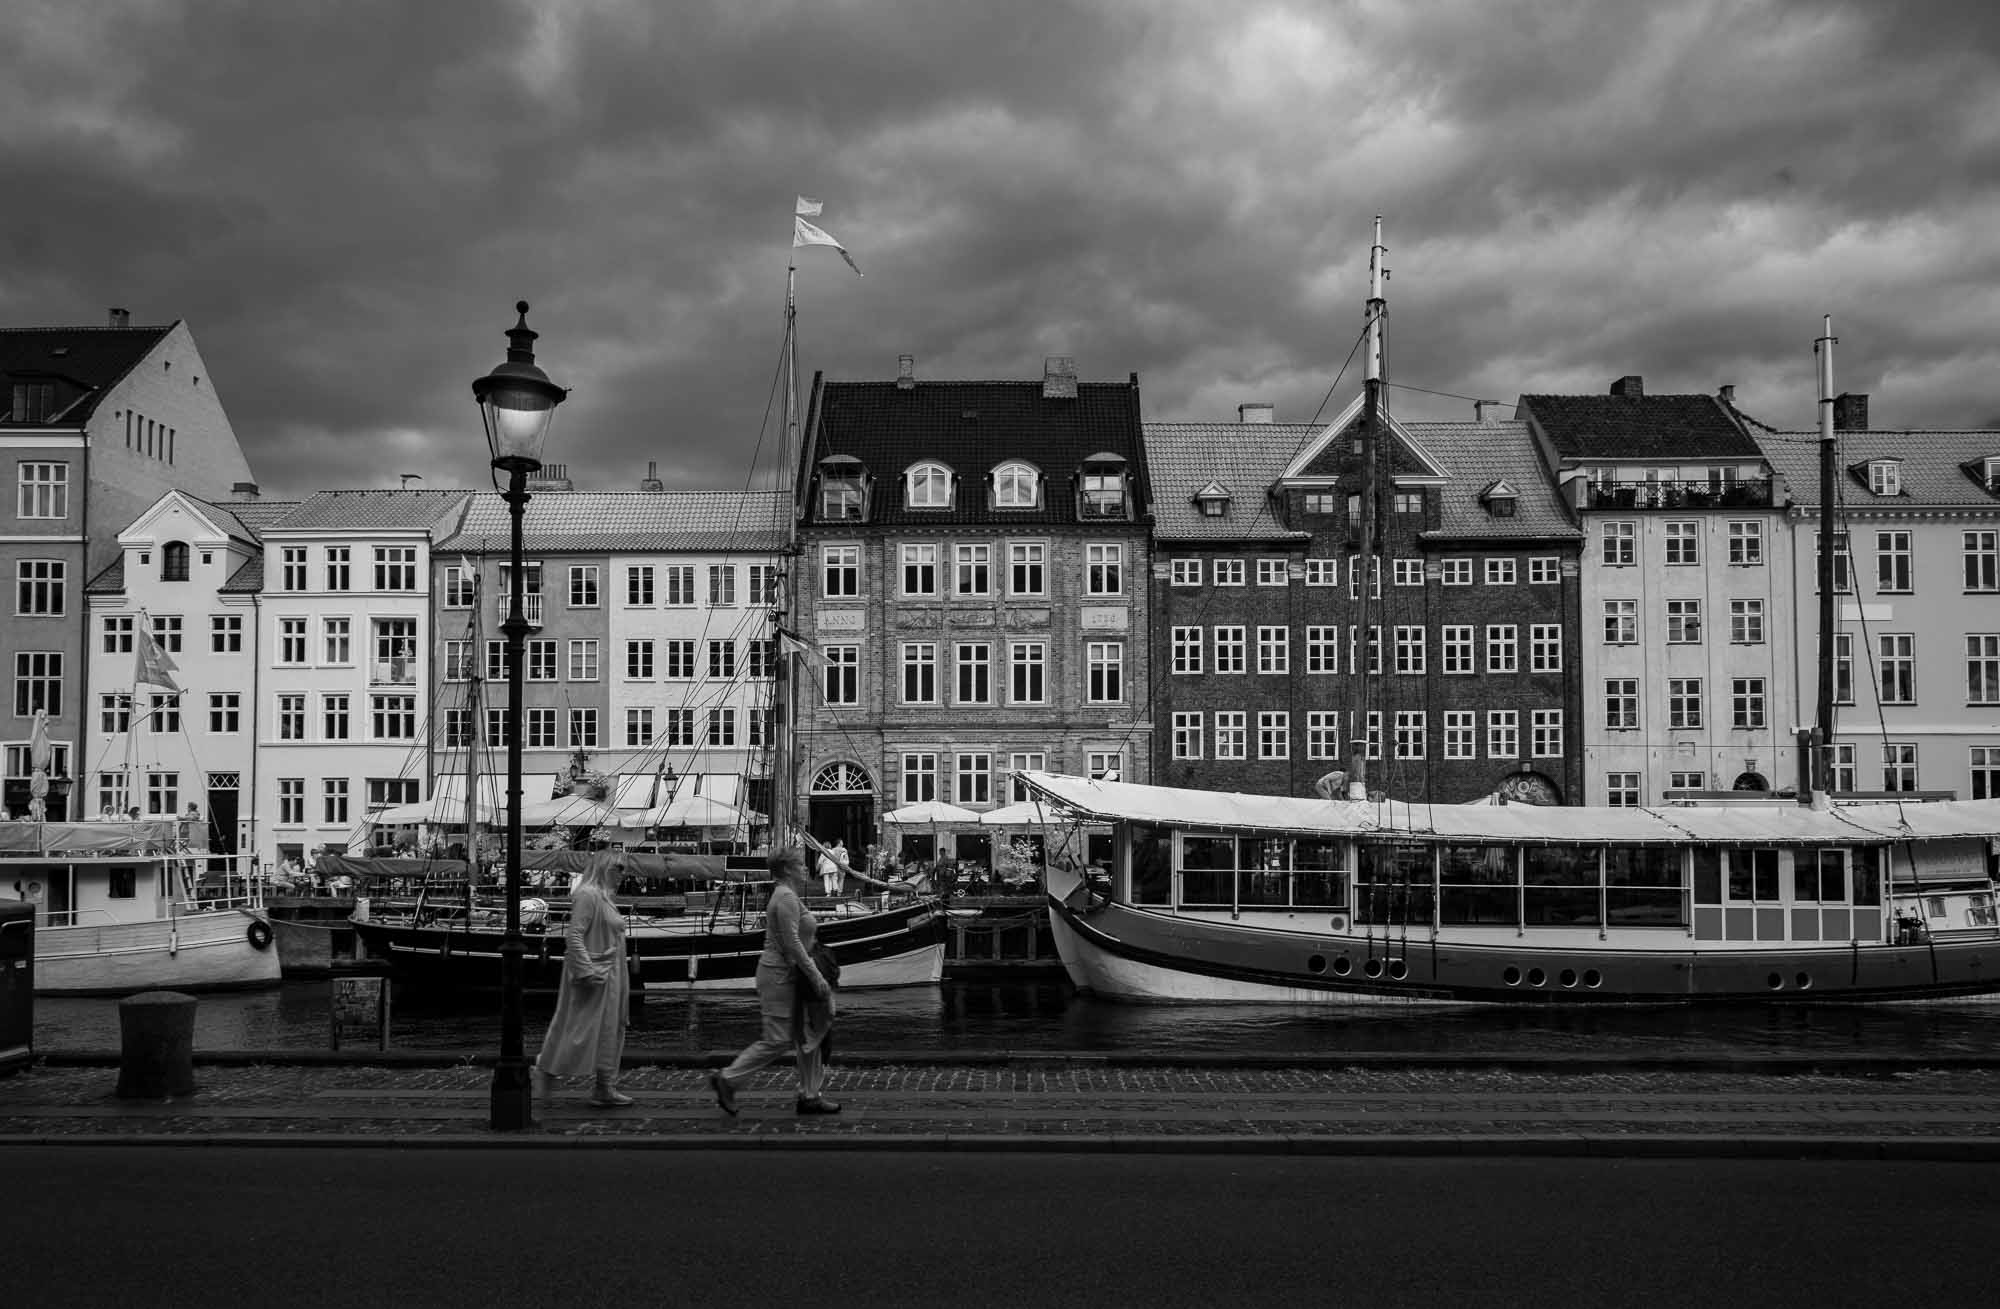 Black and white image of Nyhavn, Copenhagen, with historical buildings along the waterfront, boats docked in the canal, and people walking by.